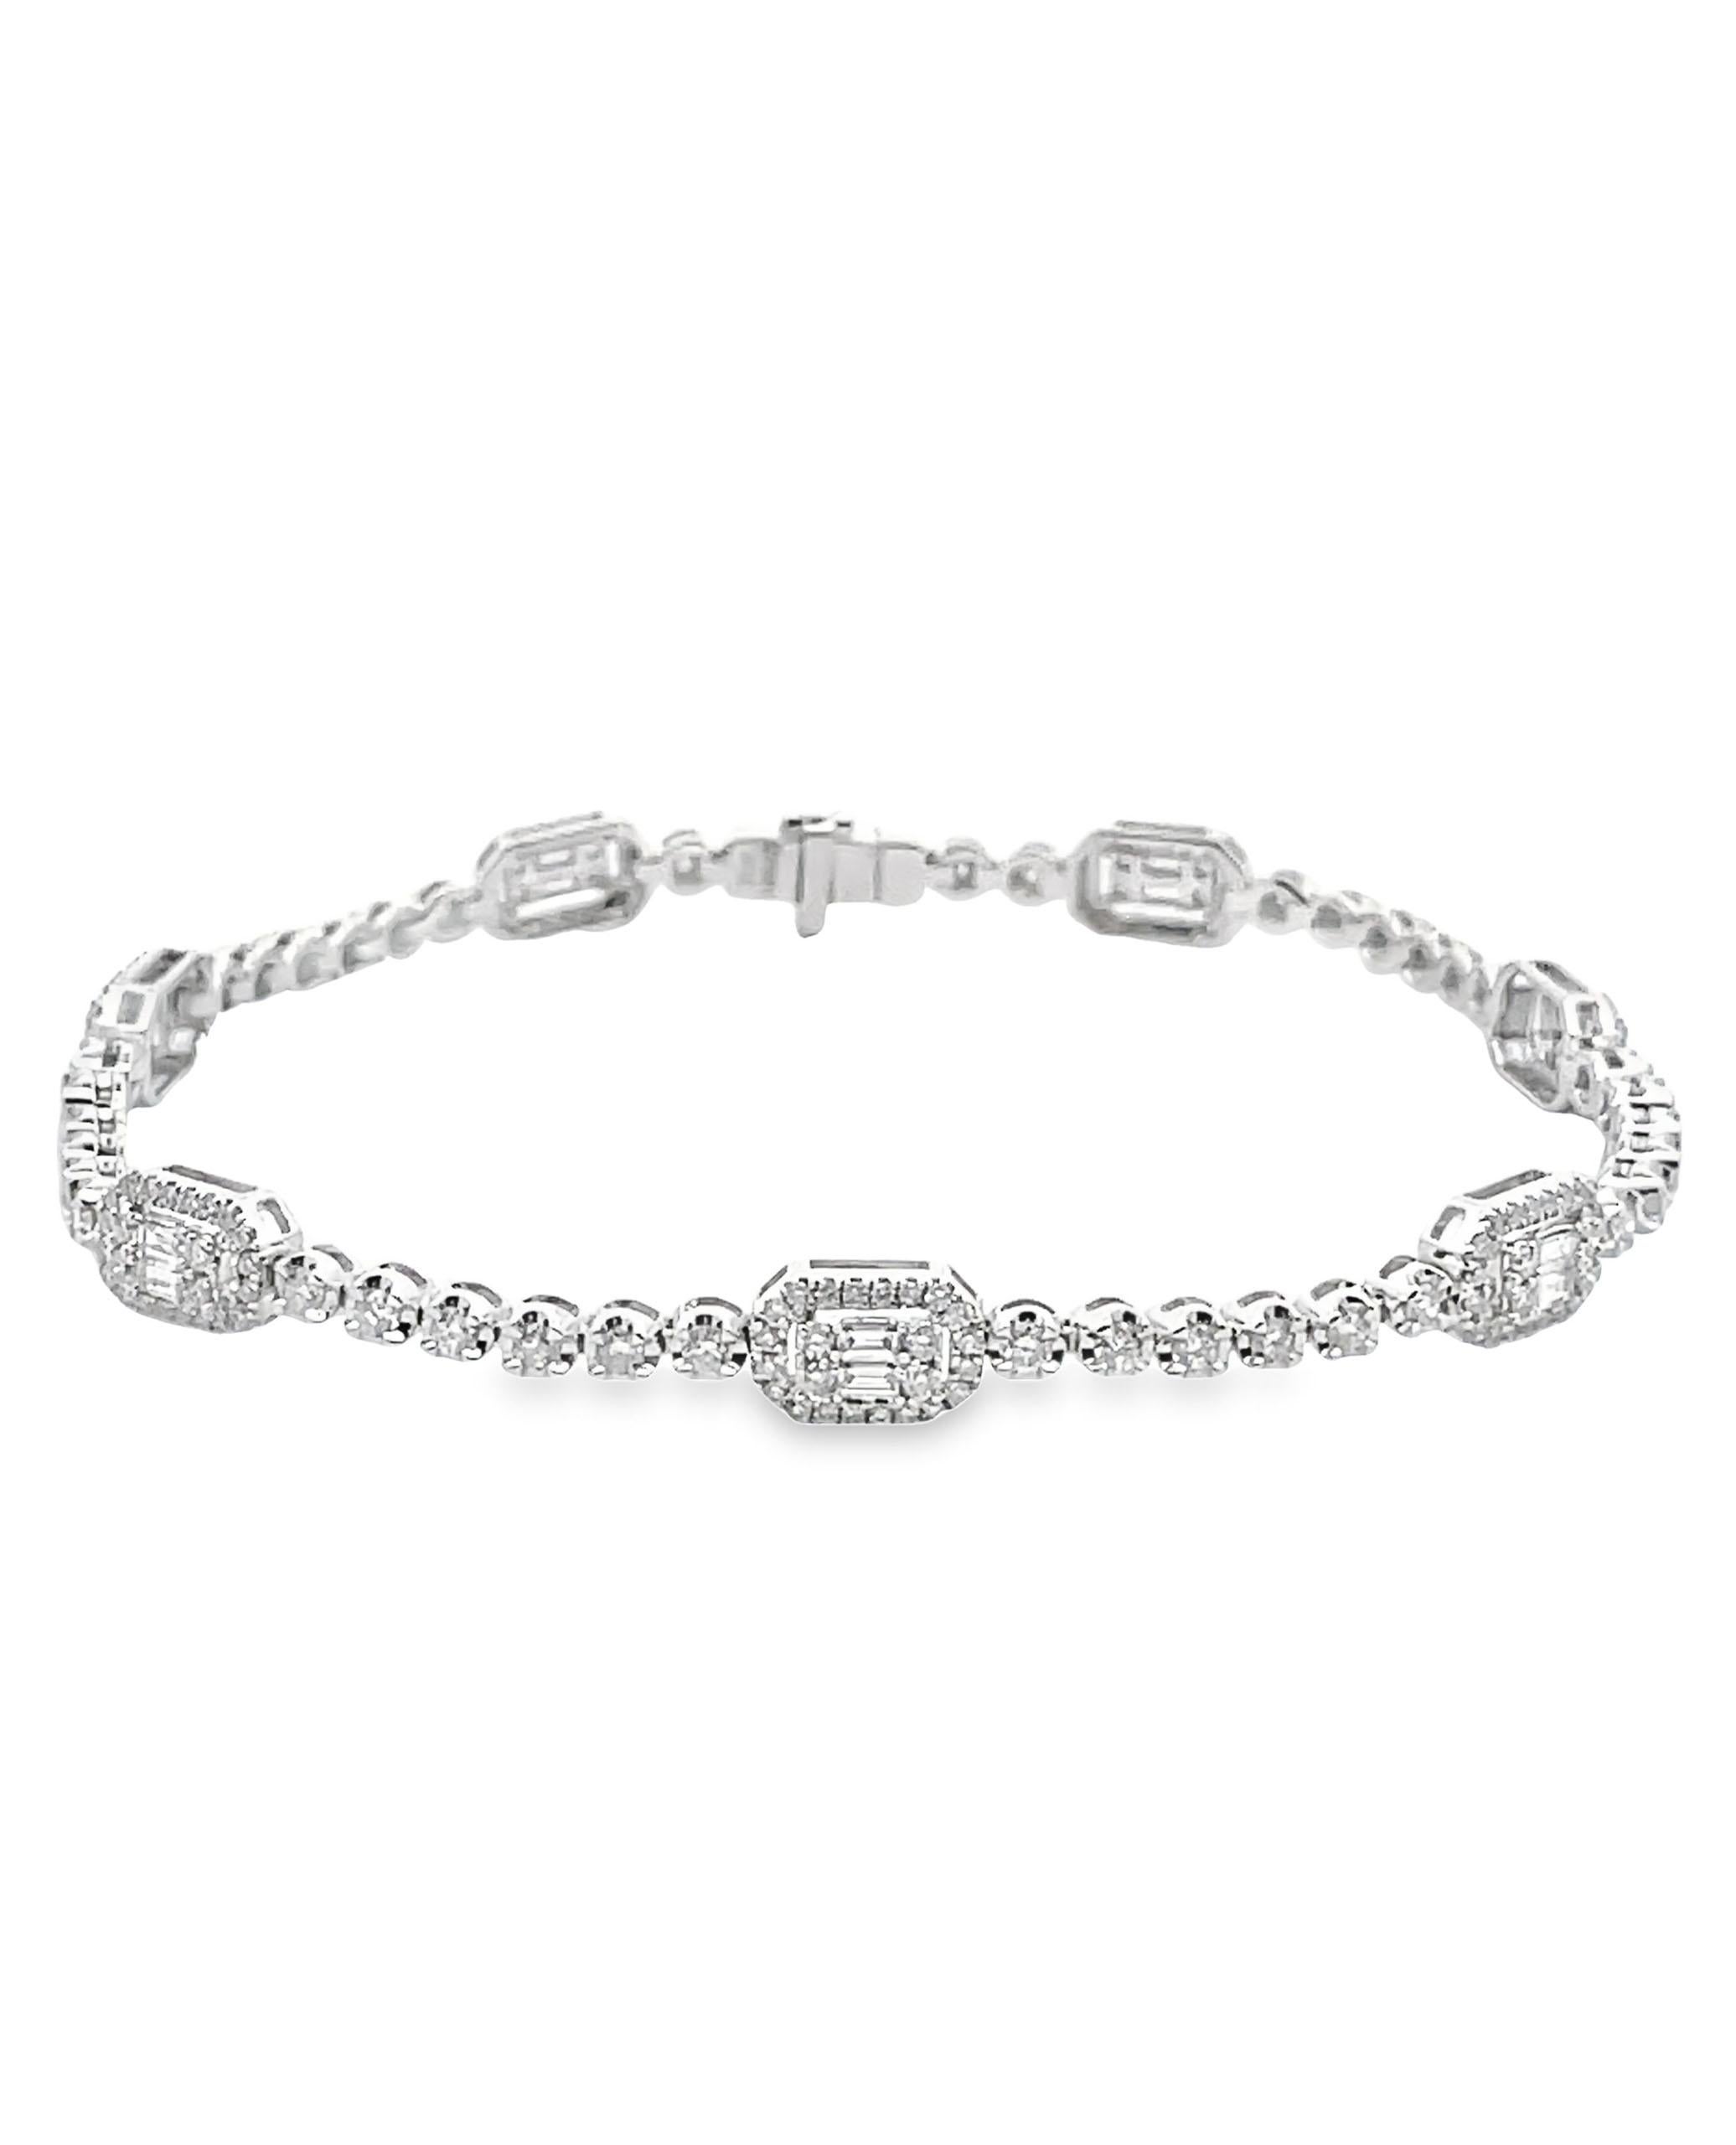 18K white gold bracelet furnished with 210 round faceted and baguette diamonds weighing 1.57 carats total.

* Diamonds are G/H color, VS2/SI1